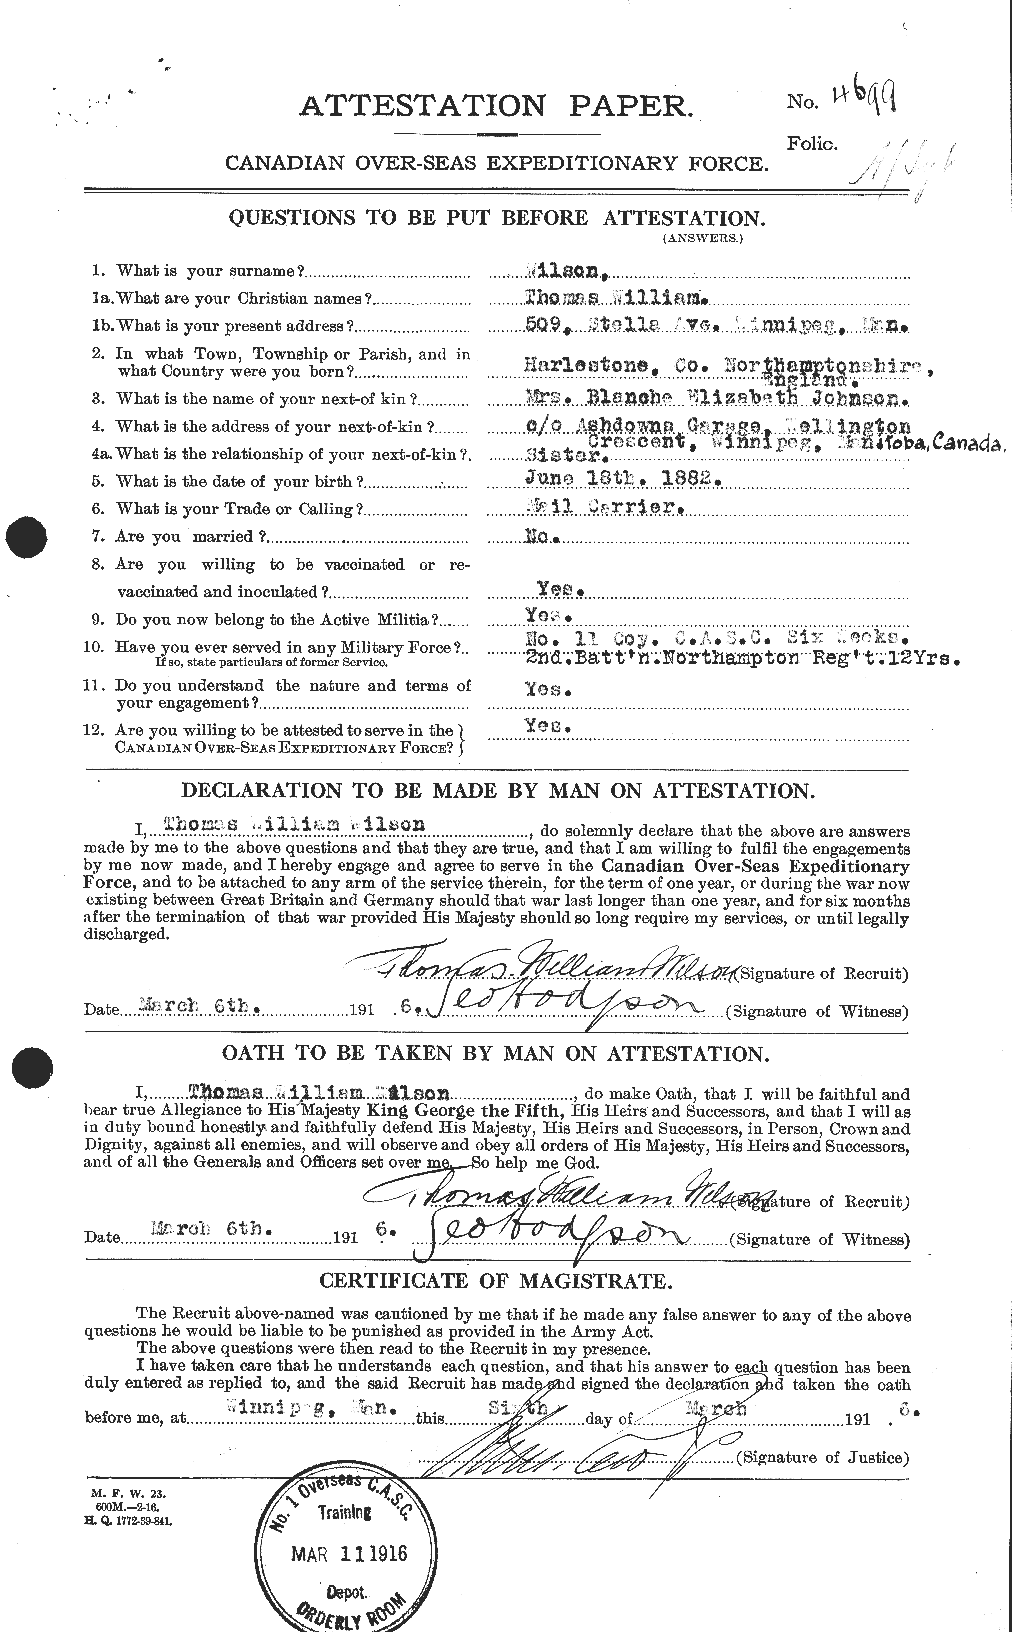 Personnel Records of the First World War - CEF 681695a